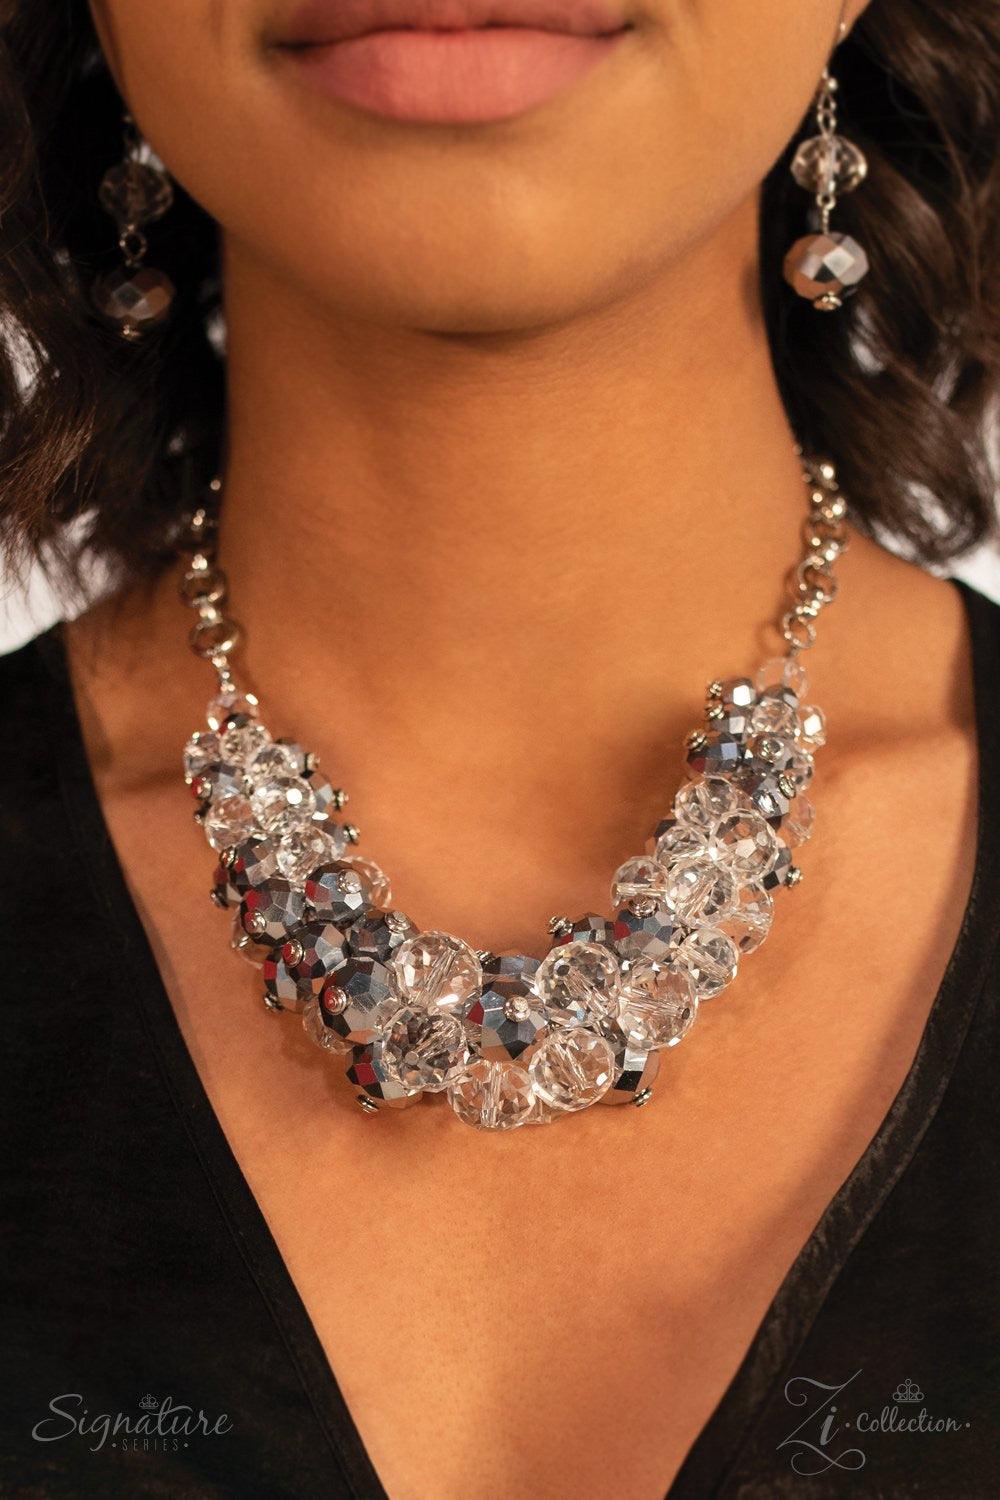 Paparazzi Accessories The Erika 💗ZiCollection $25💗 Sparkling crystal-like beading boldly collides with metallic beads featuring light-catching faceted edges to create a gorgeous pendant that falls just below the collar. The beads gradually increase in s